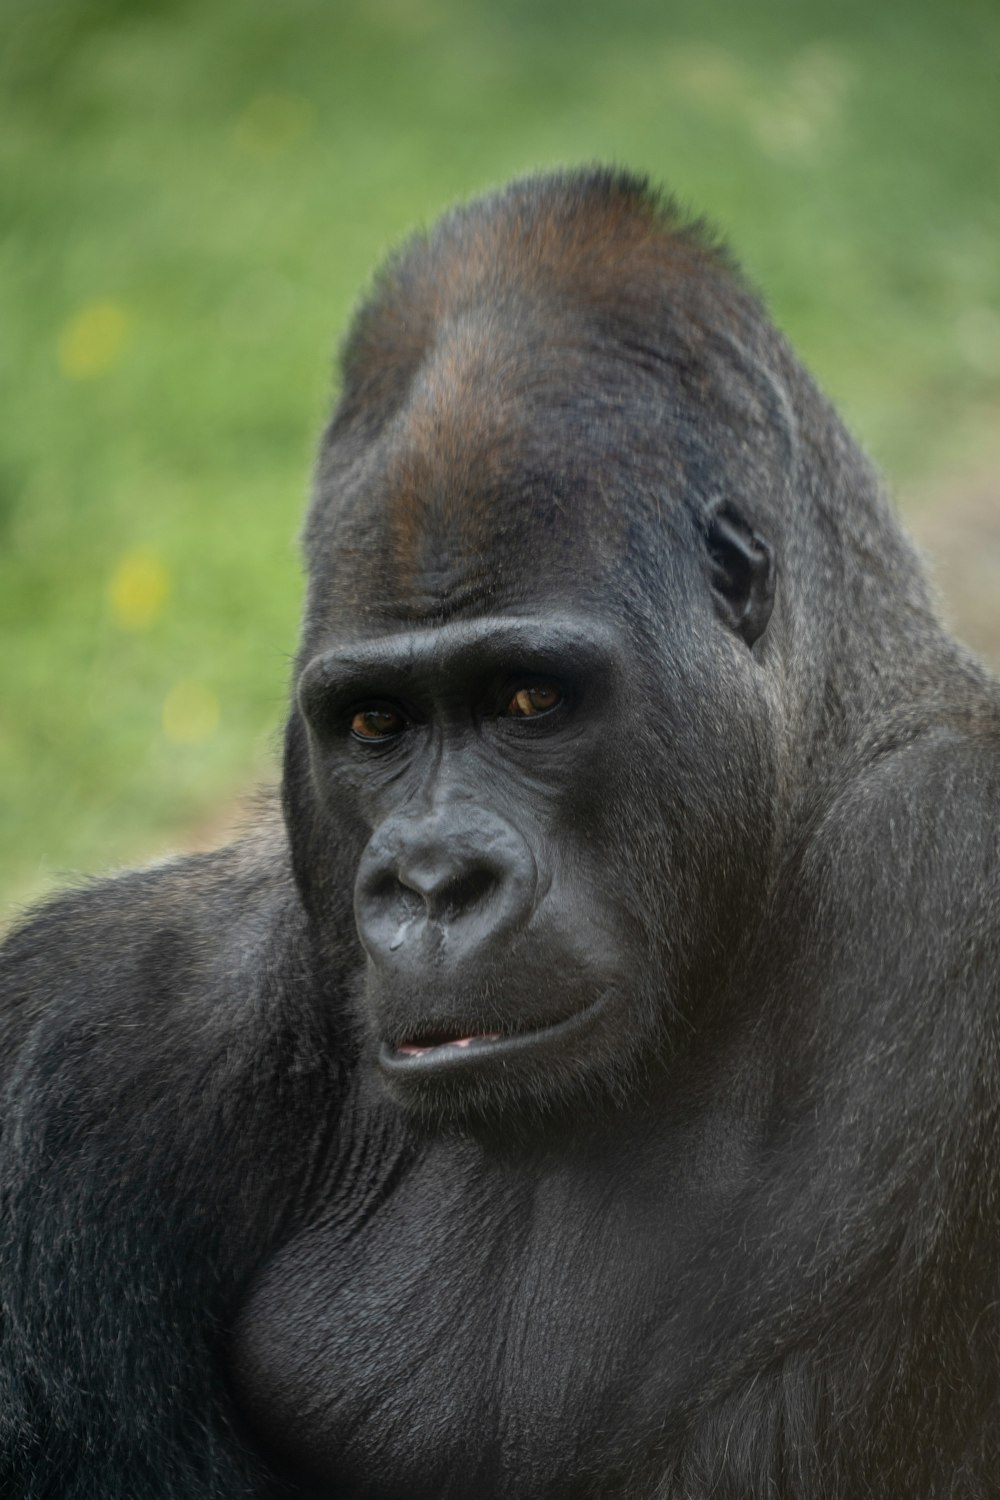 black gorilla in close up photography during daytime